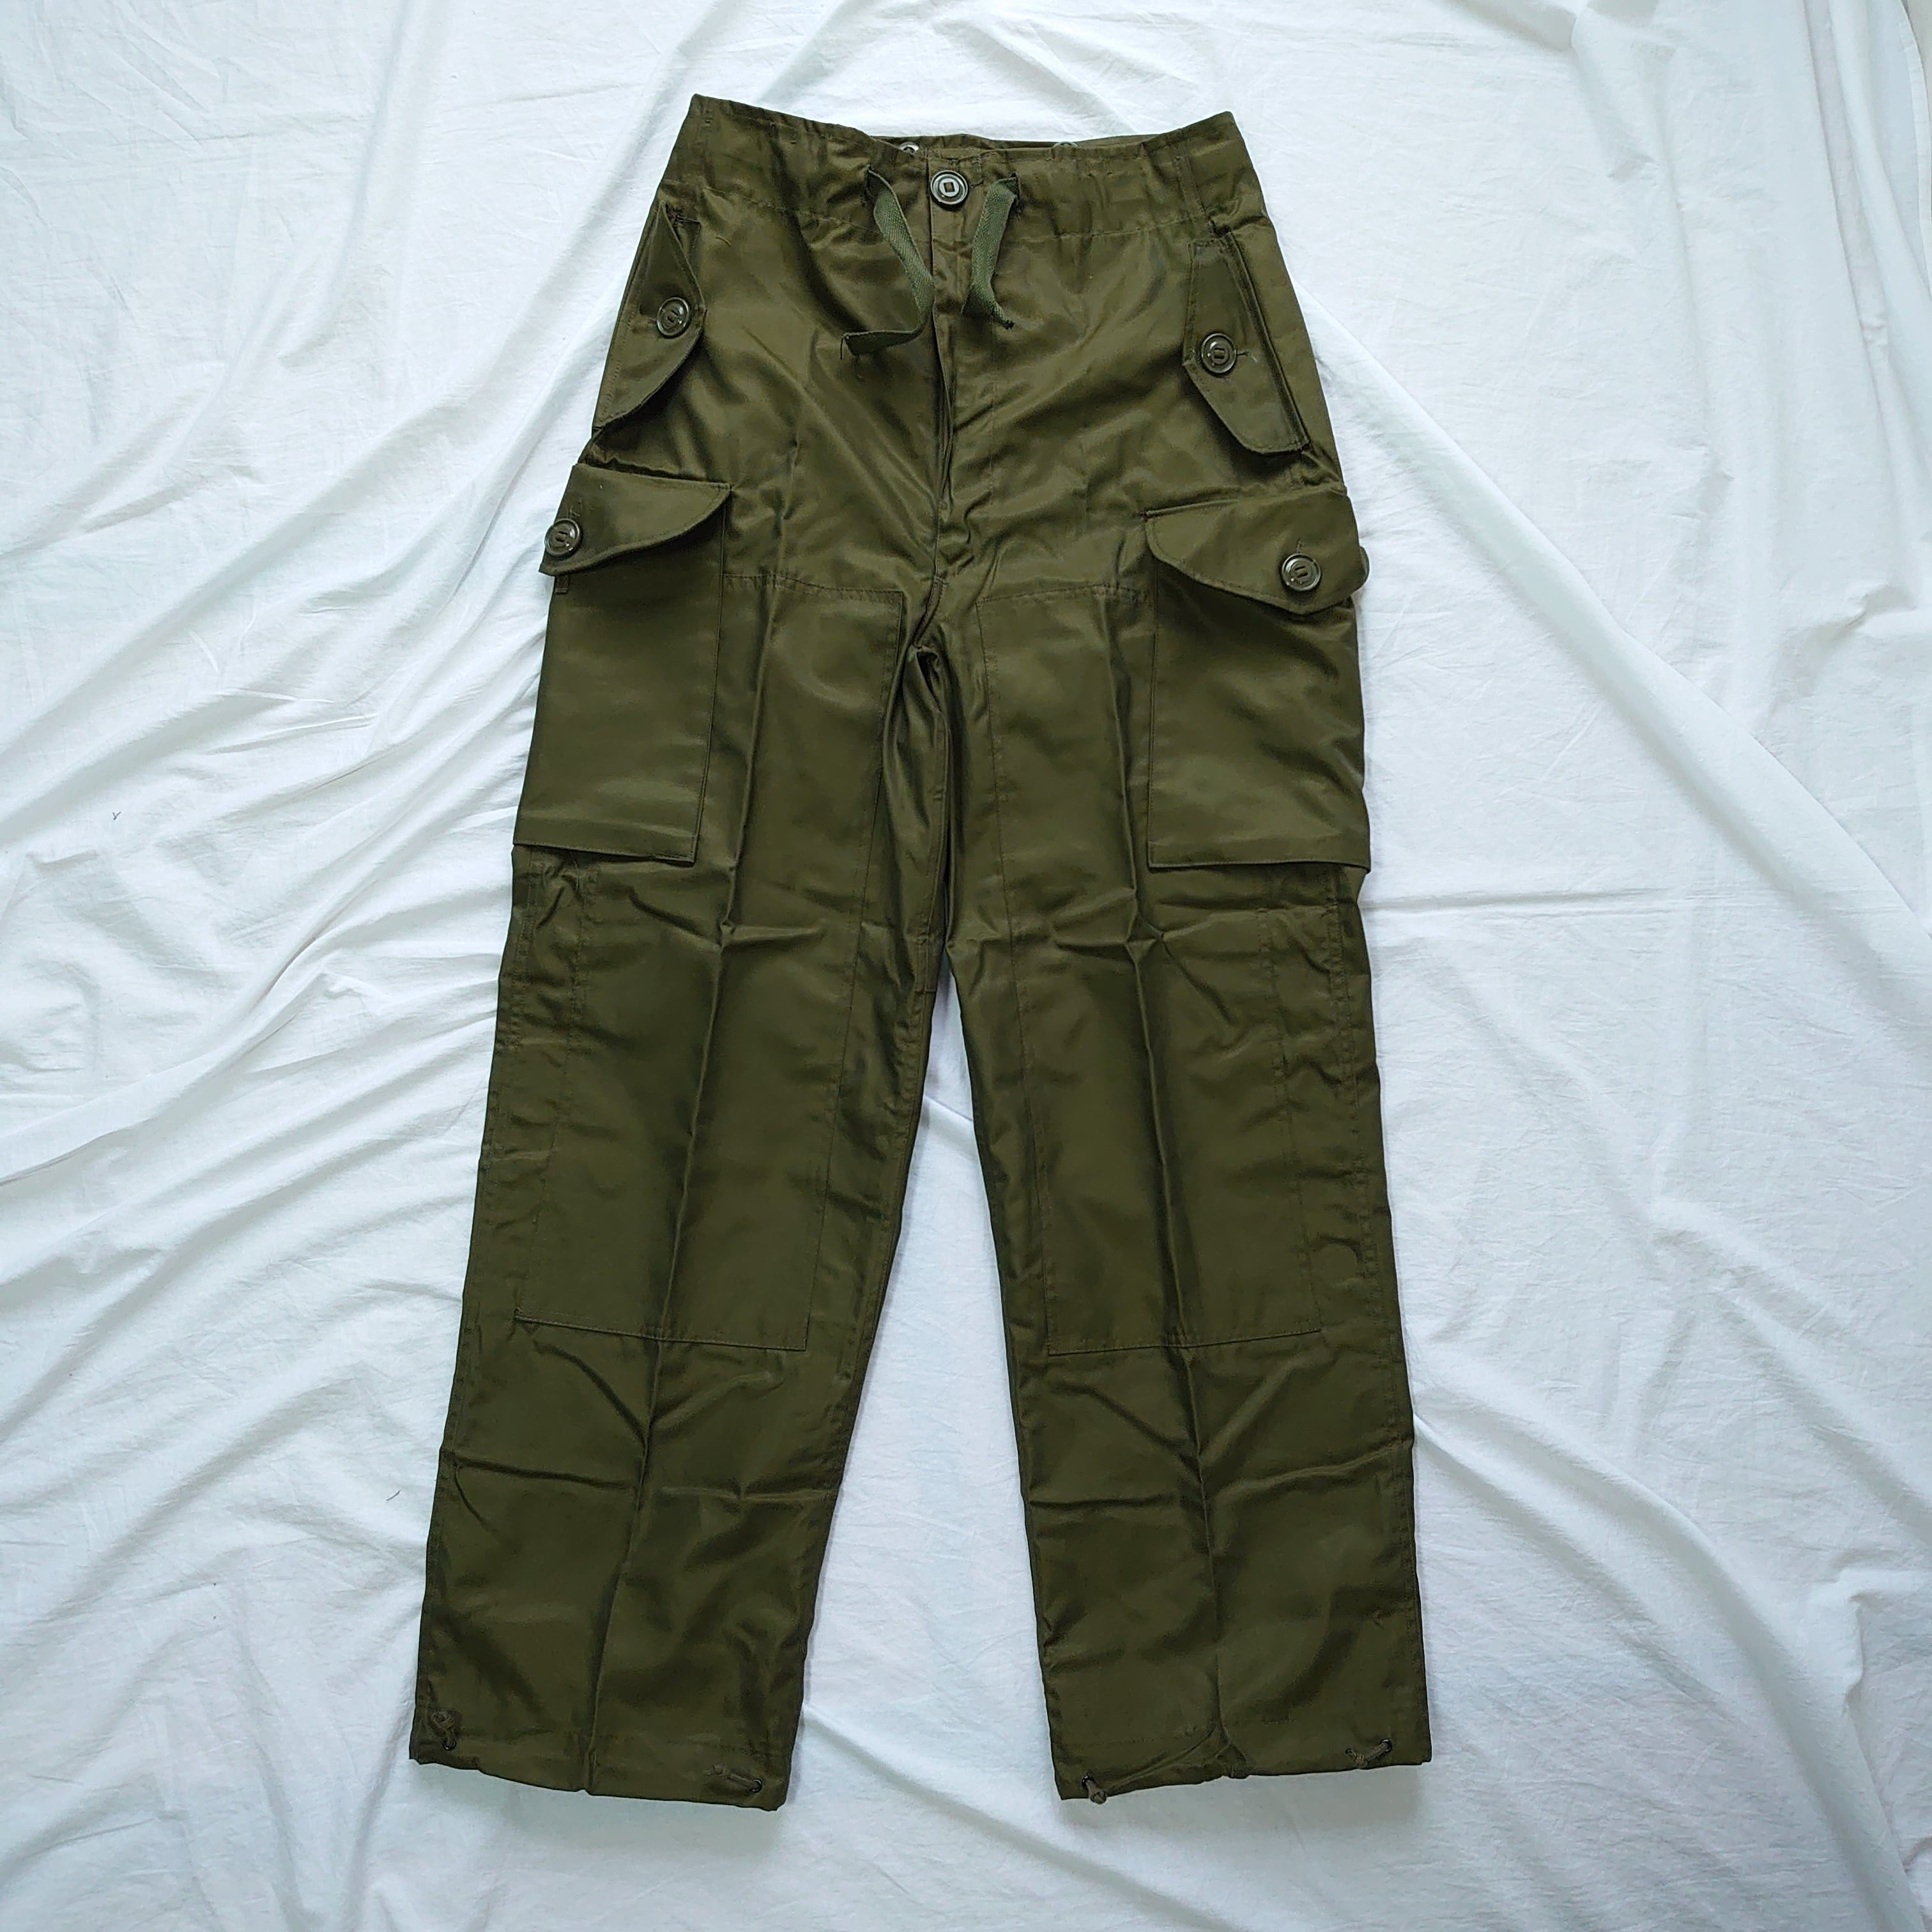 Deadstock】Canadian Army カナダ軍 ウィンドオーバーパンツ カーゴ 